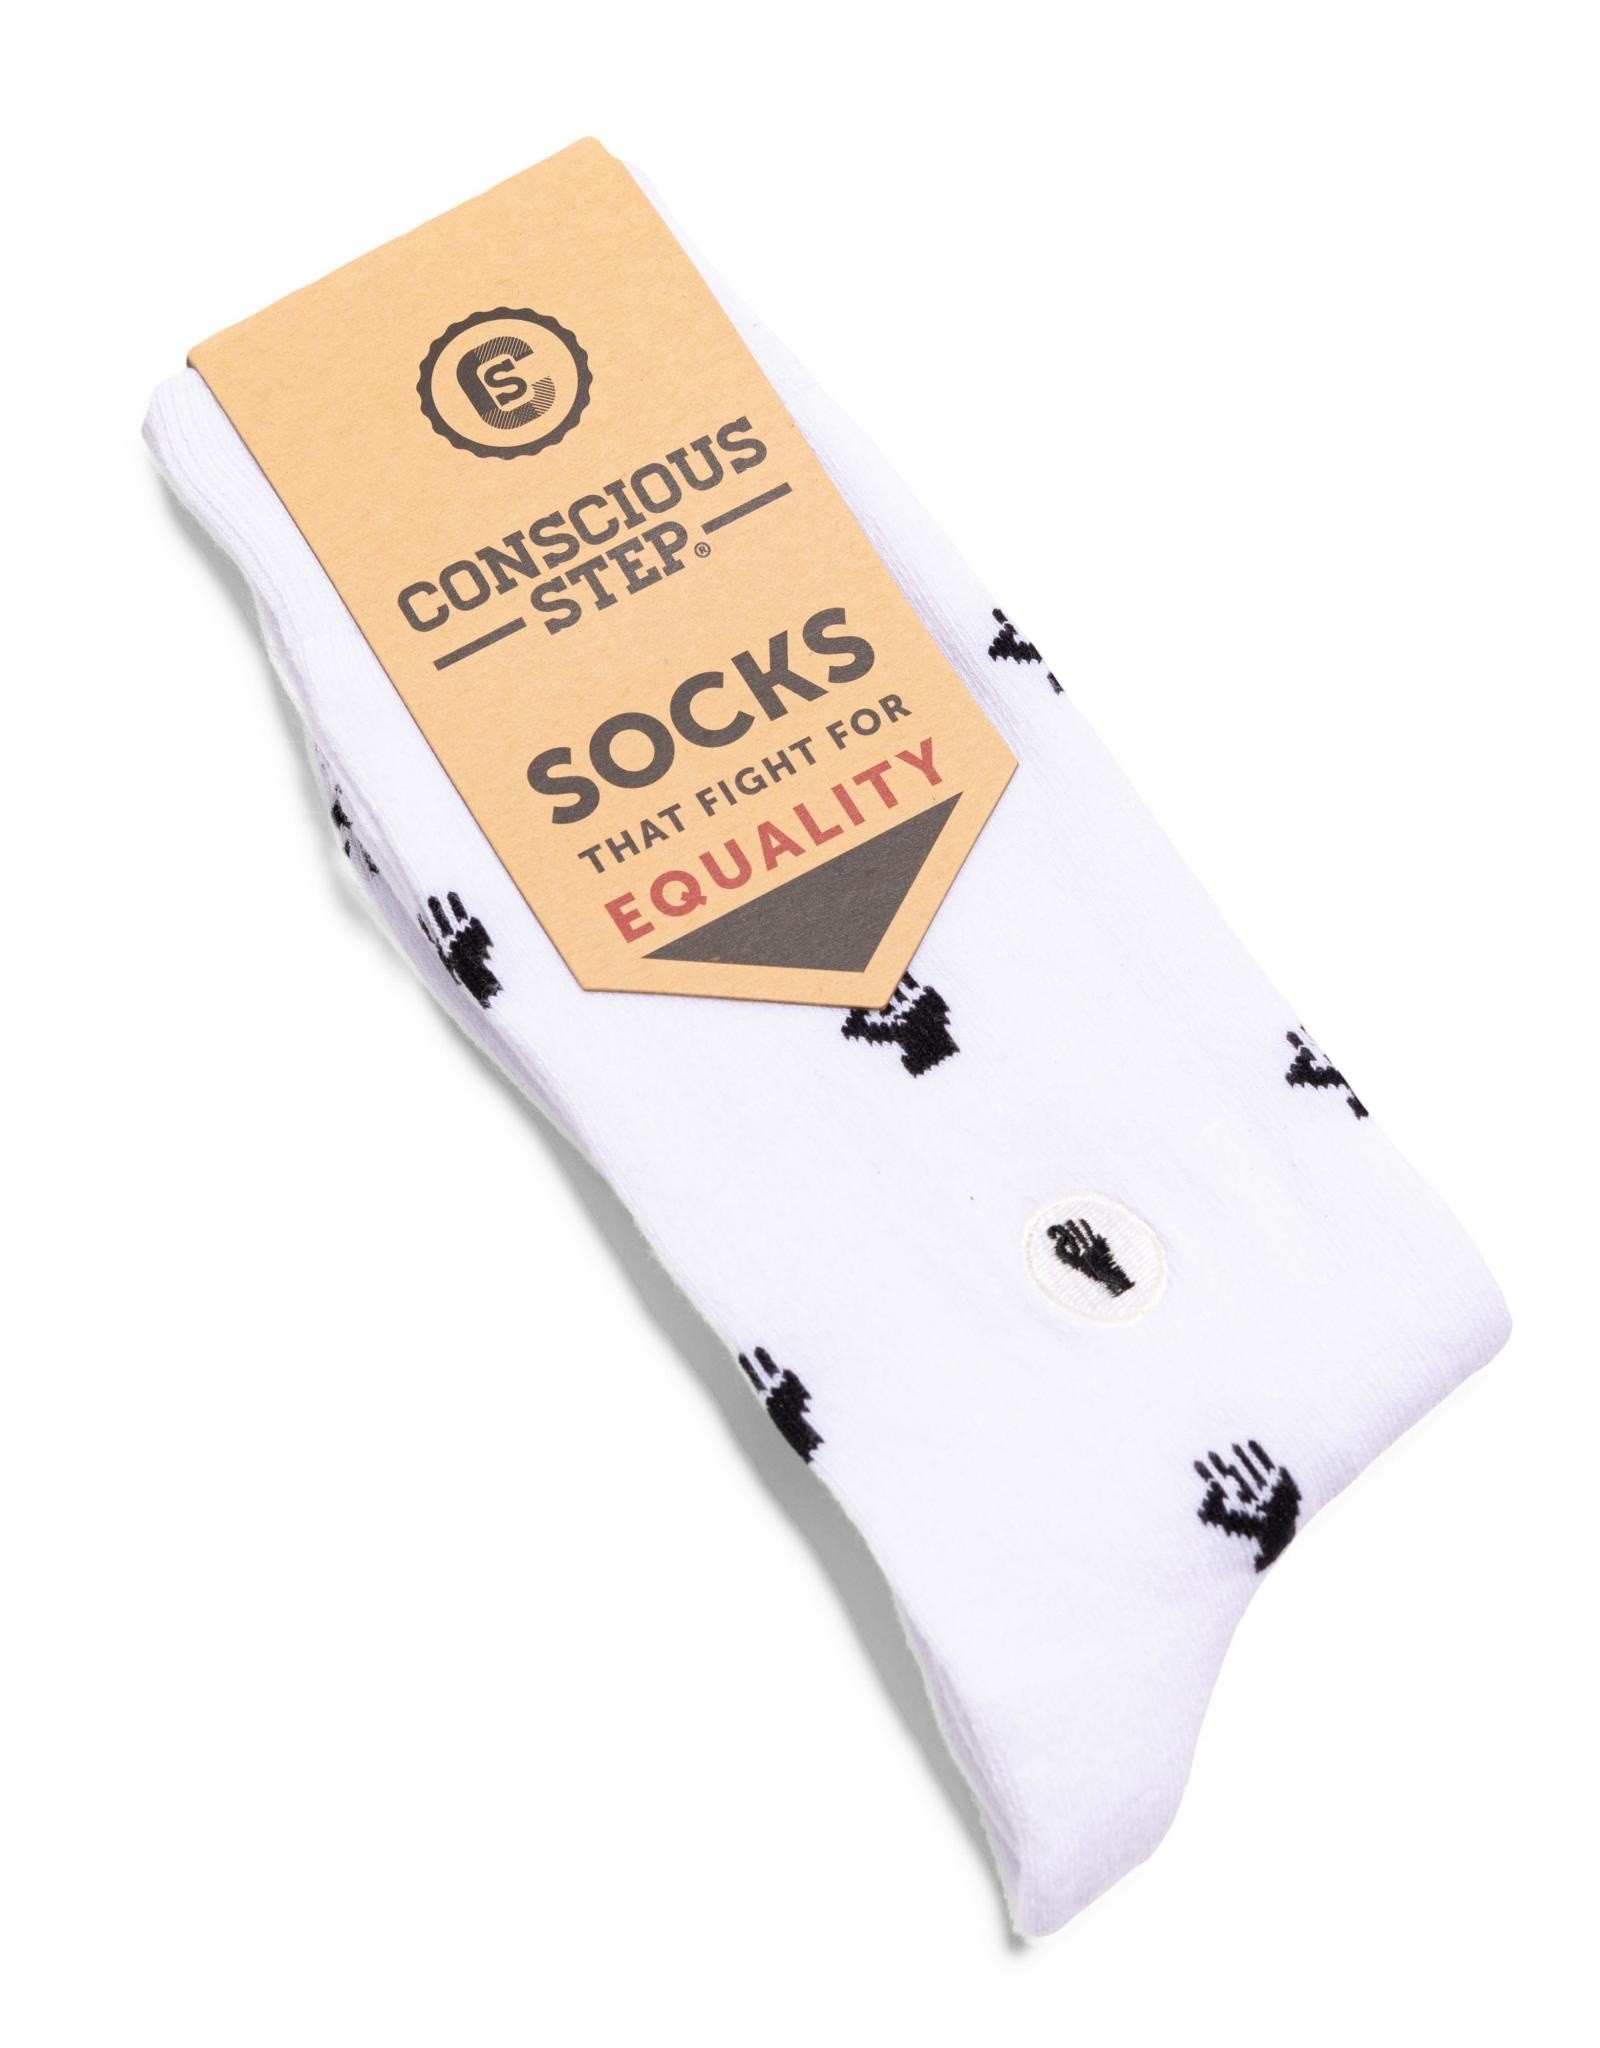 Conscious Step Socks that Fight for Equality (White Background)